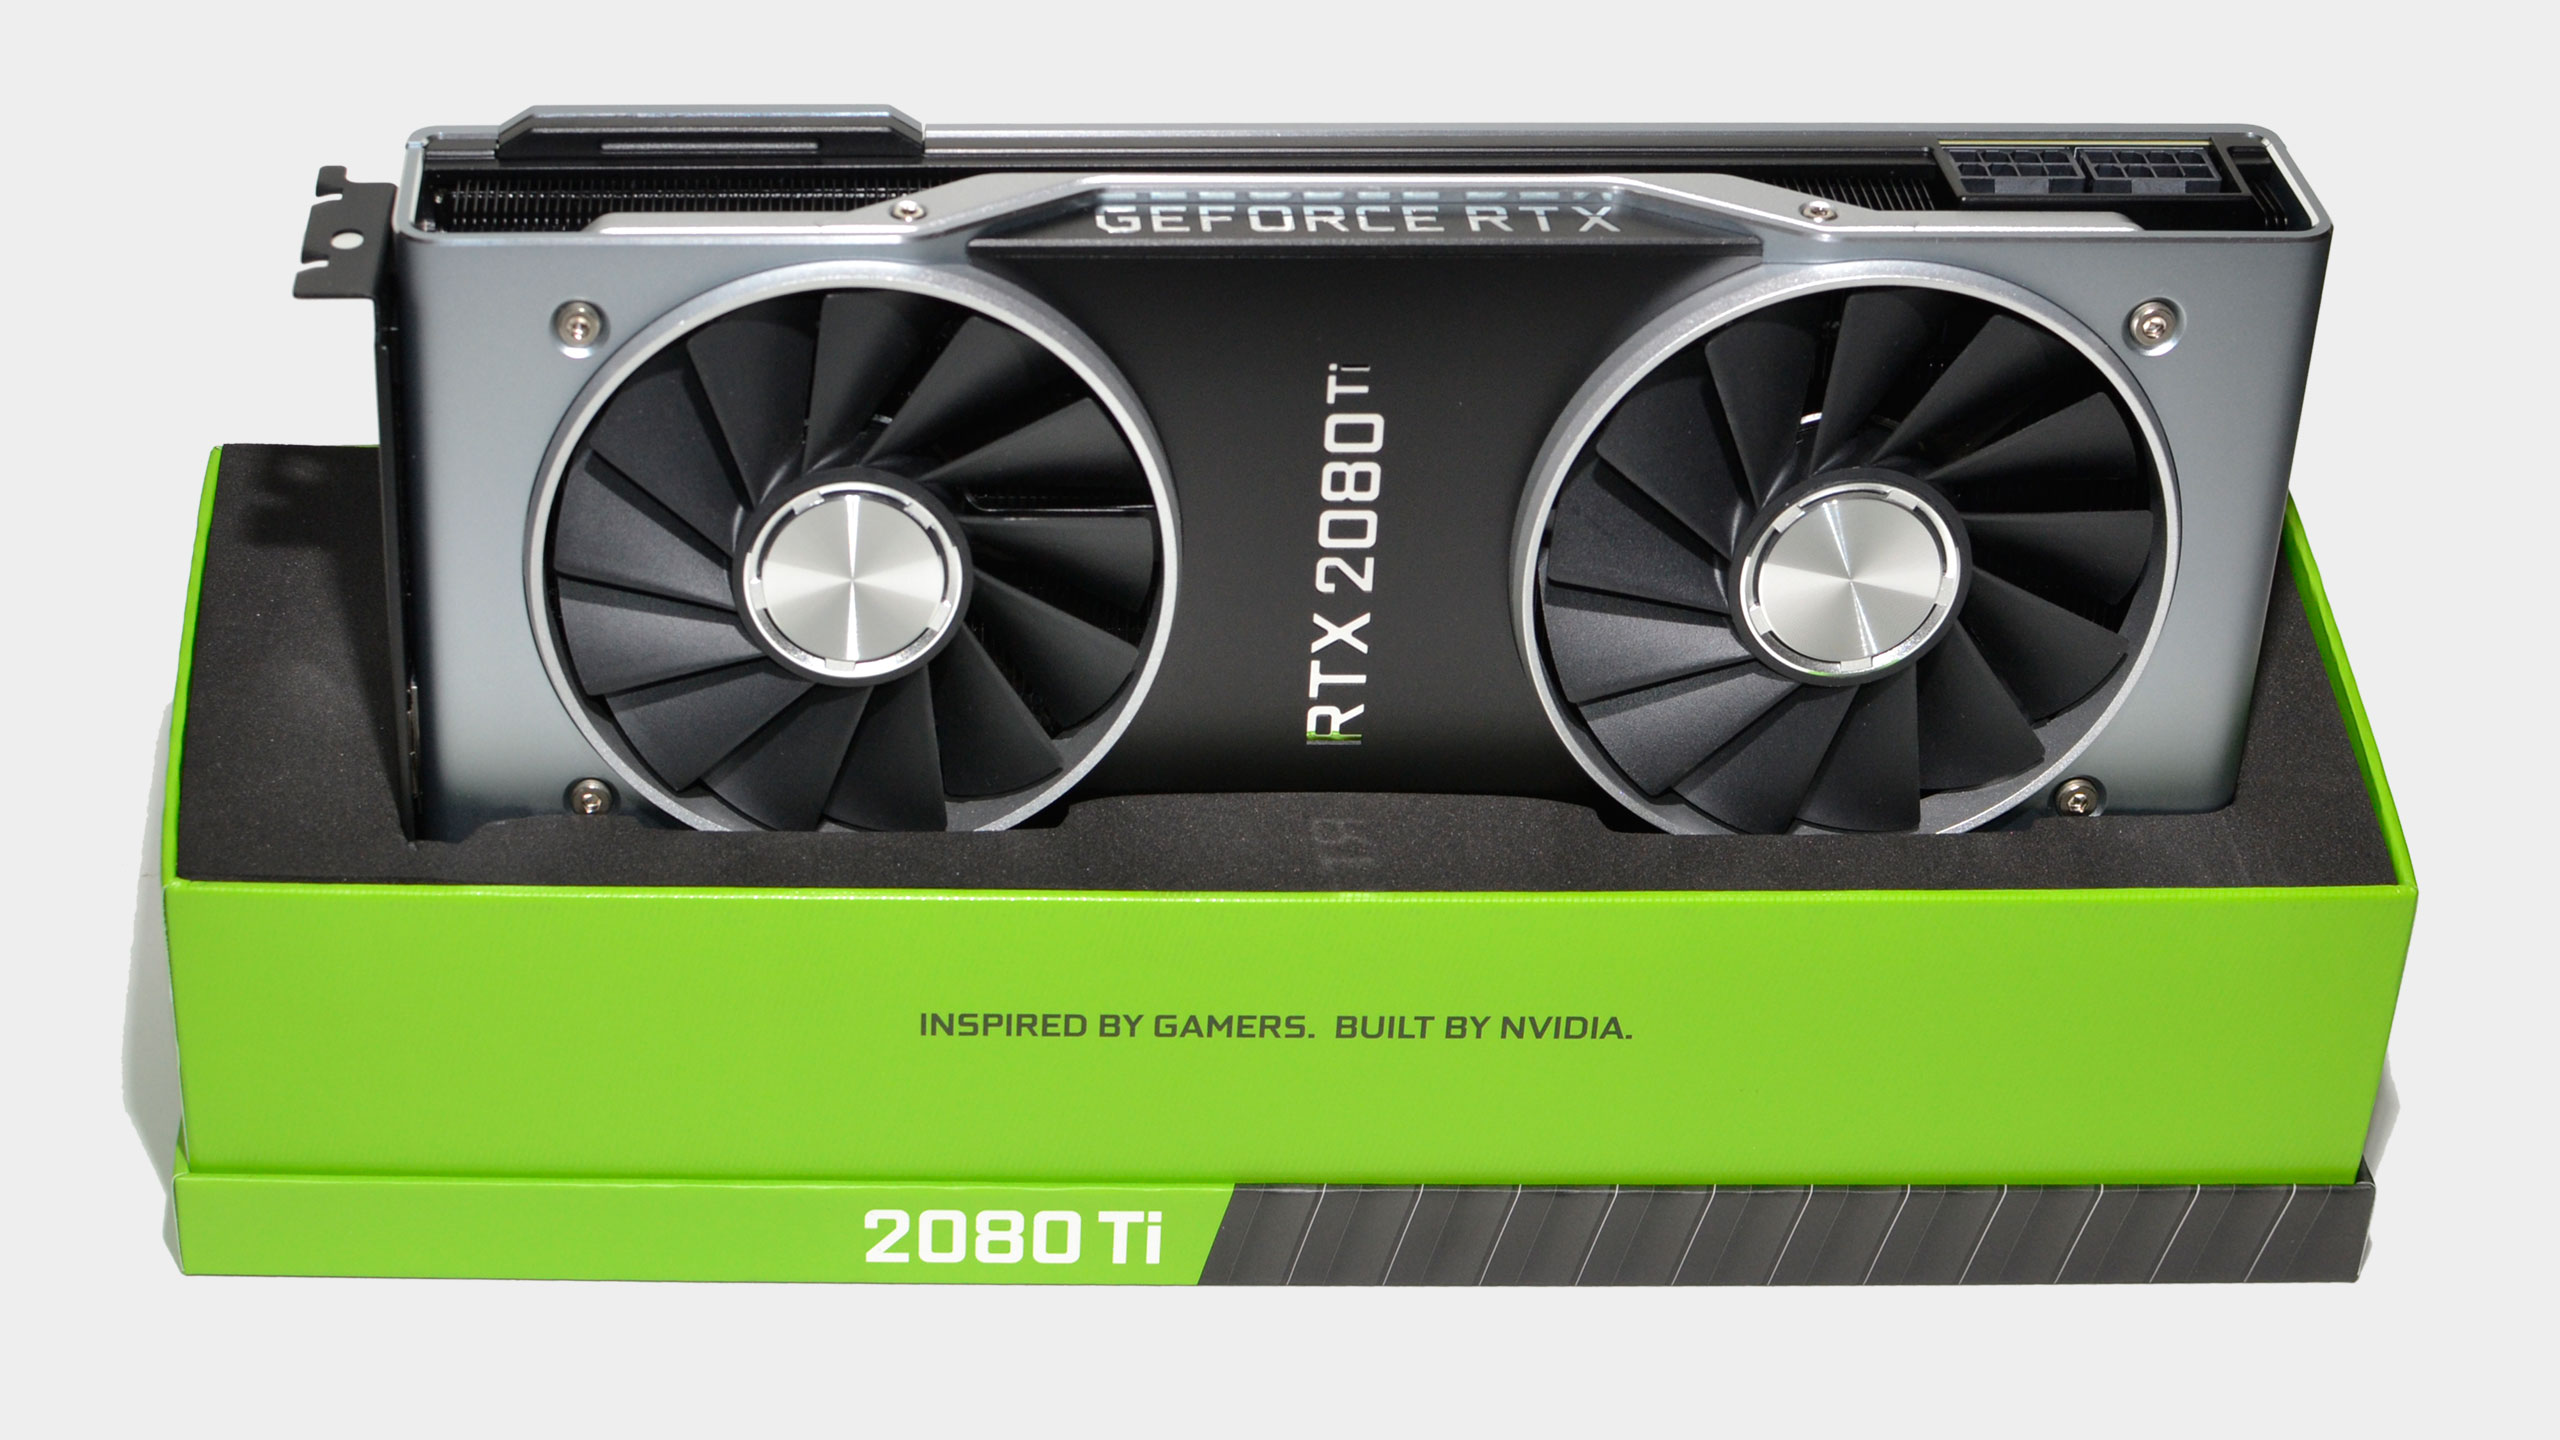 Mose Burma Diplomati Nvidia GeForce RTX 2080 Ti Founders Edition review | PC Gamer